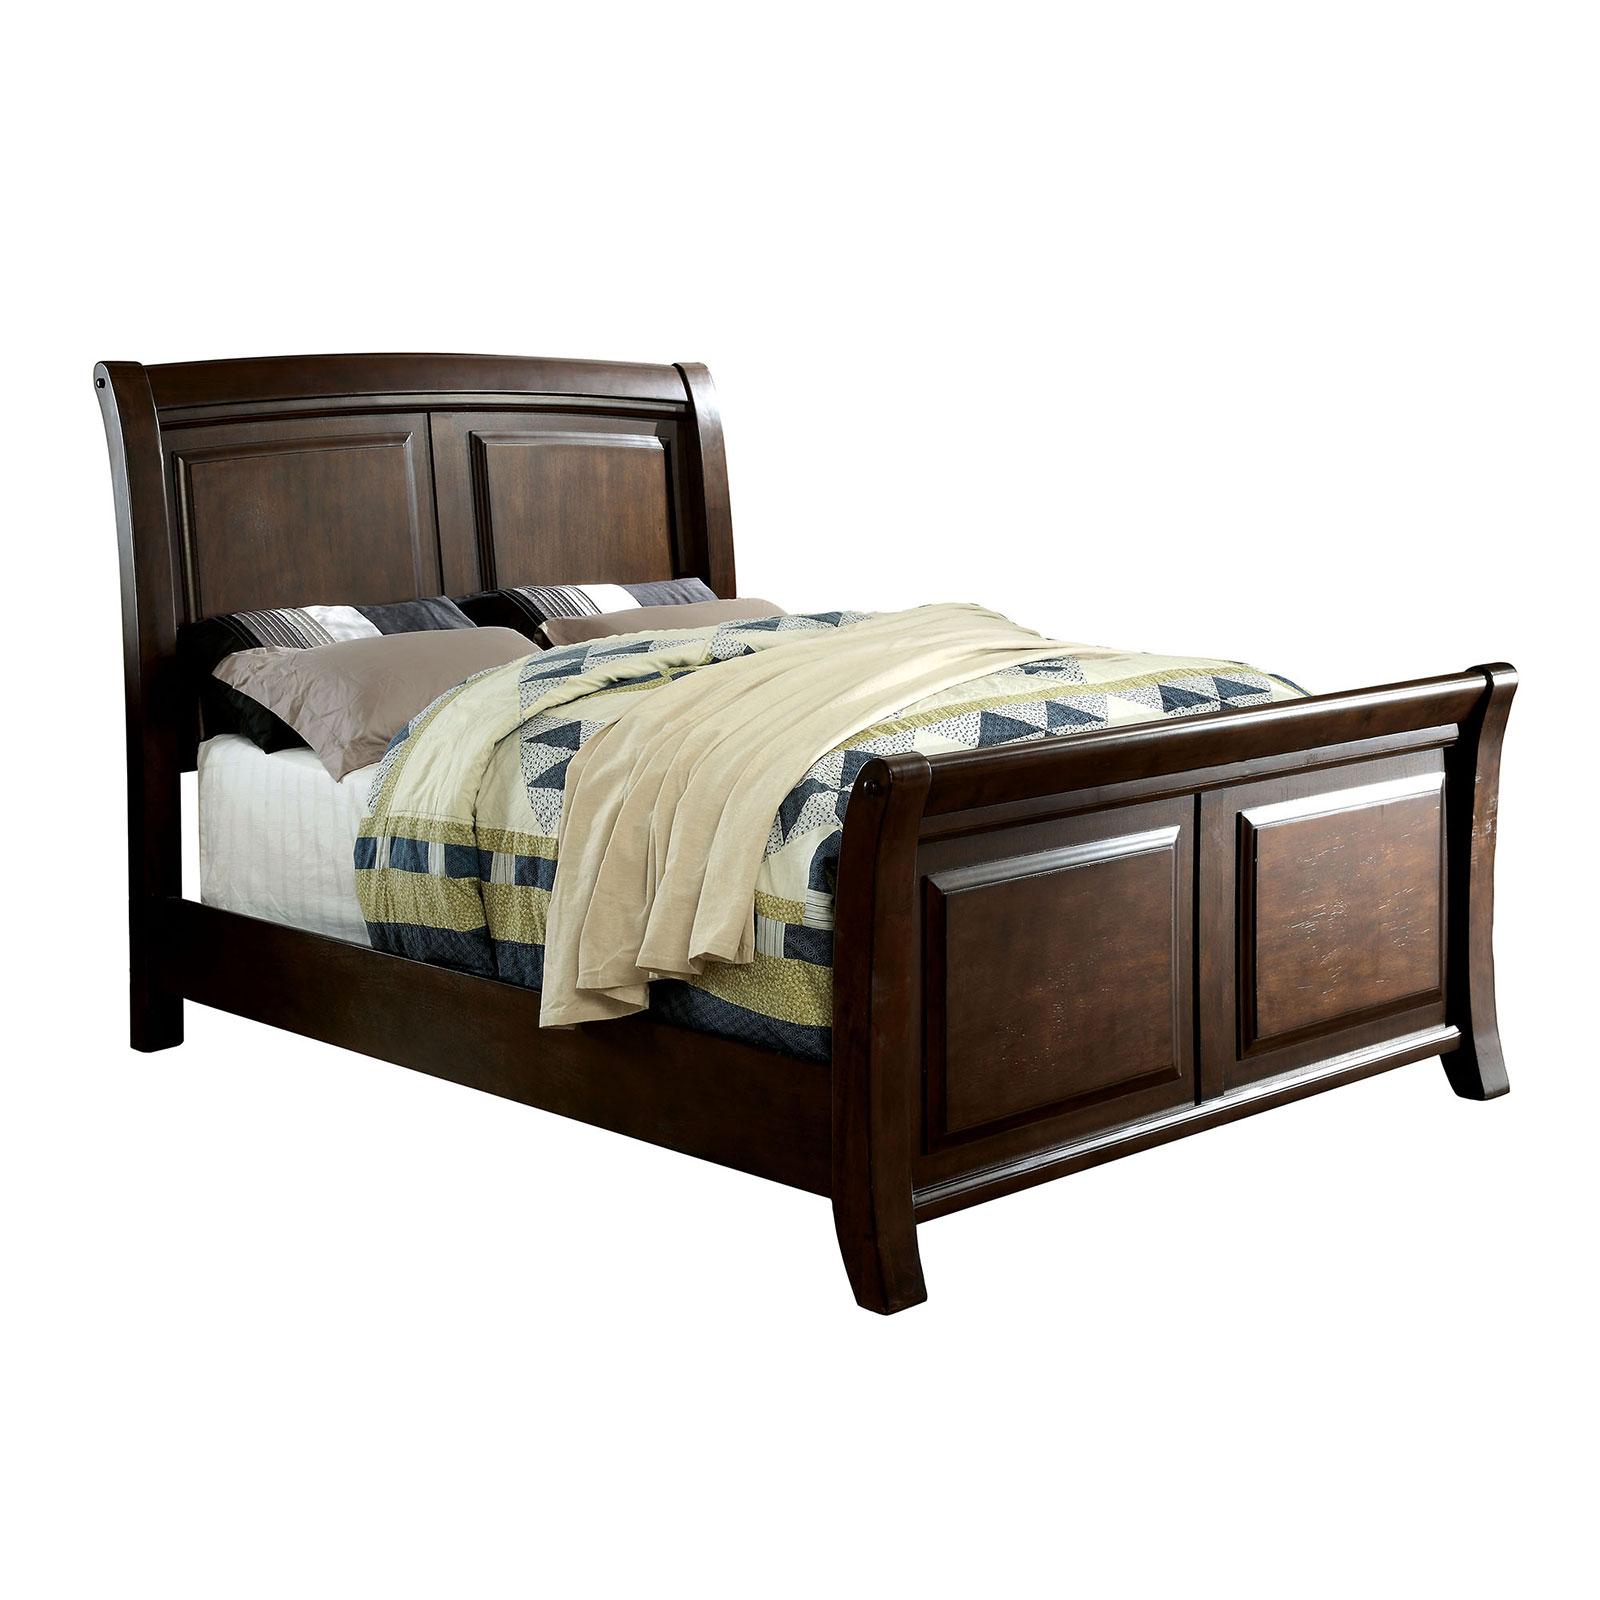 Transitional Sleigh Bed LITCHVILLE CM7383Q CM7383Q-BED in Cherry, Brown Lacquer